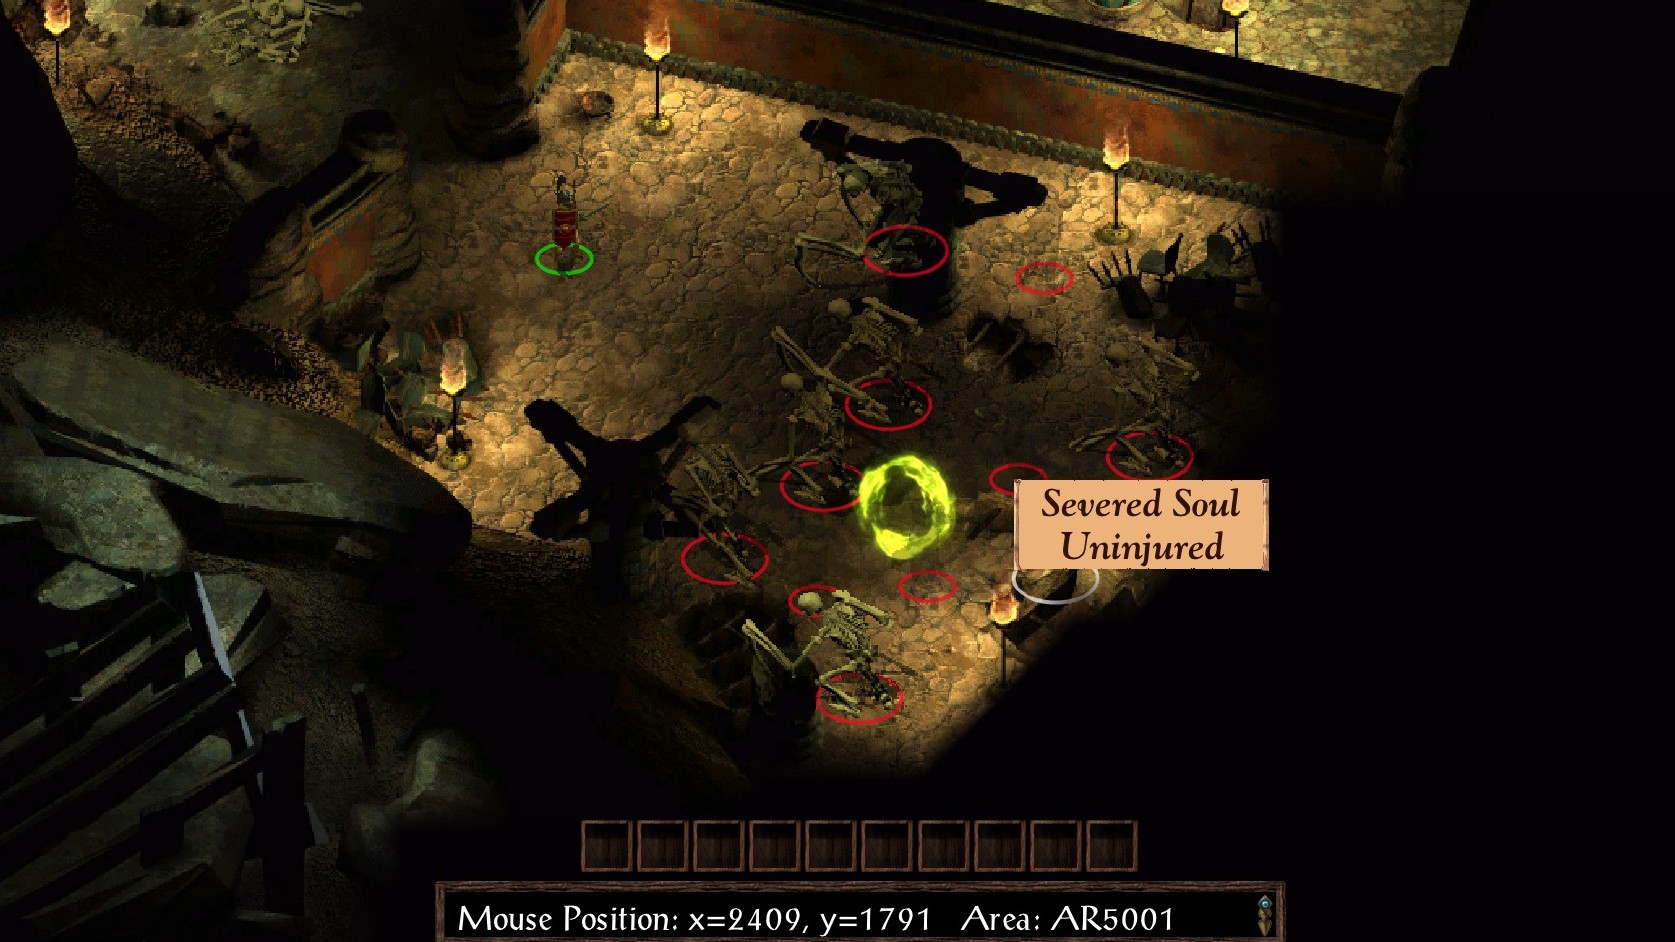 Icewind Dale: Enhanced Edition - Guide includes a list of random treasures - Severed Hand - levels 1 & 2 - 8937F8E